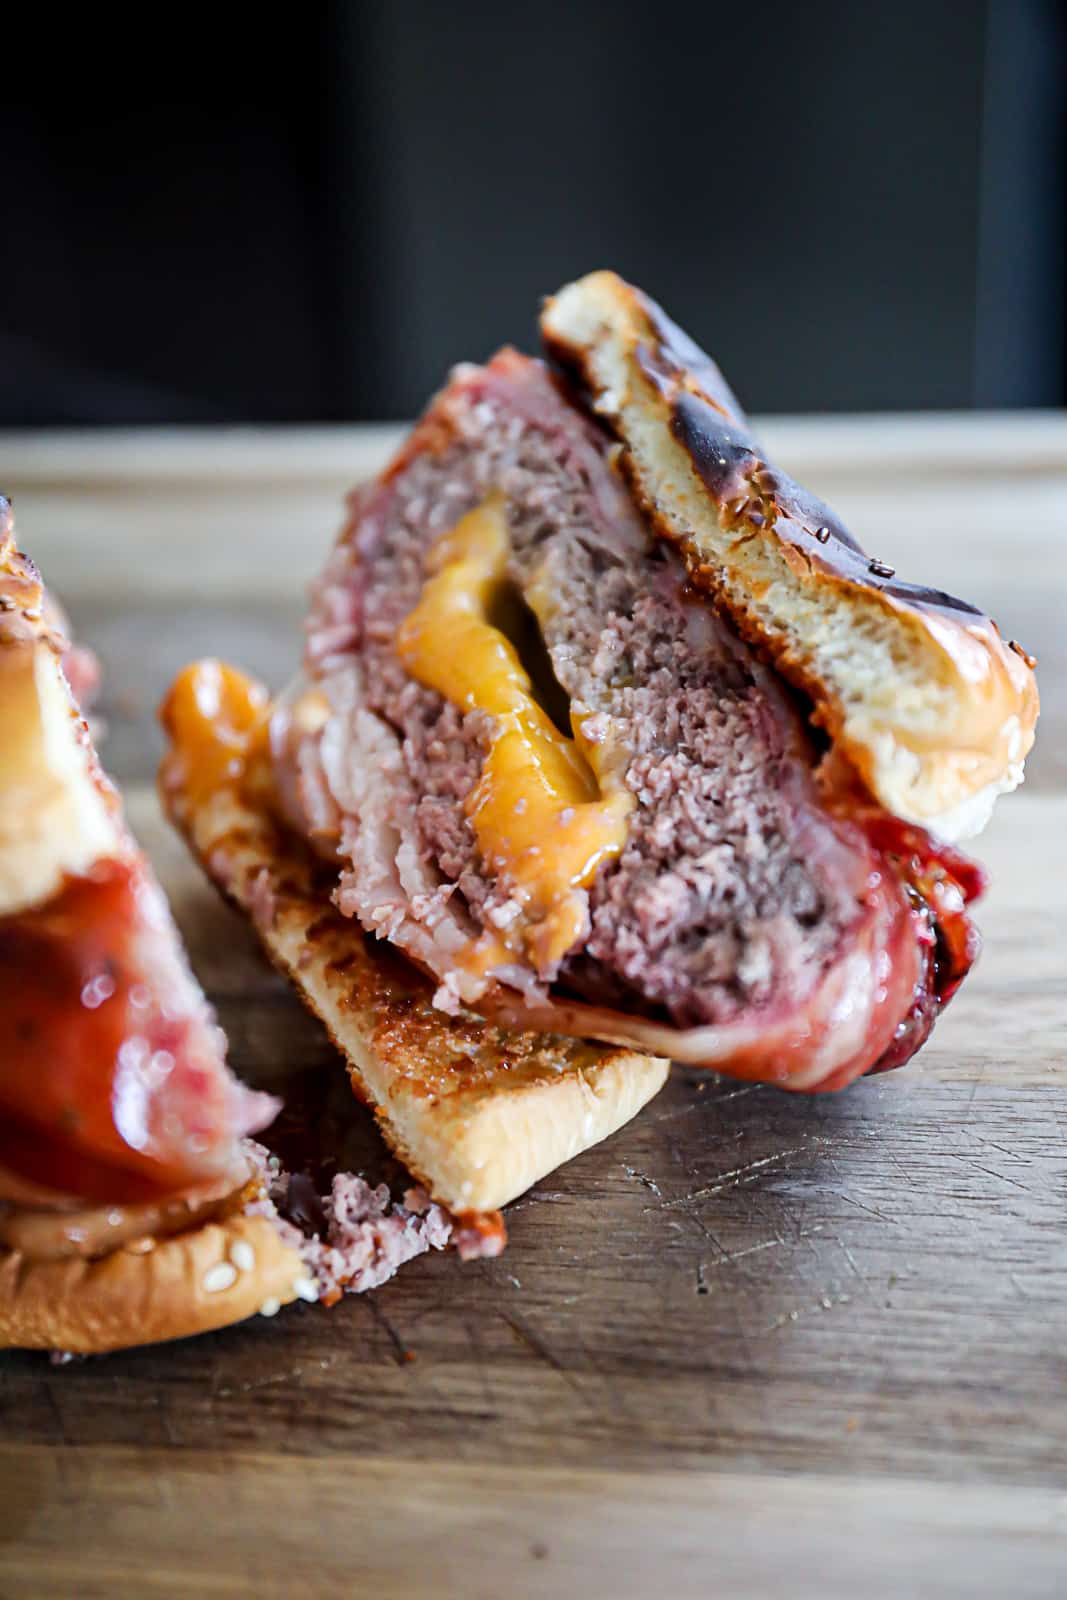 Cut In Half ½ LB burger patties smoked wrapped in bacon with cheese stuffed inside on a cutting board